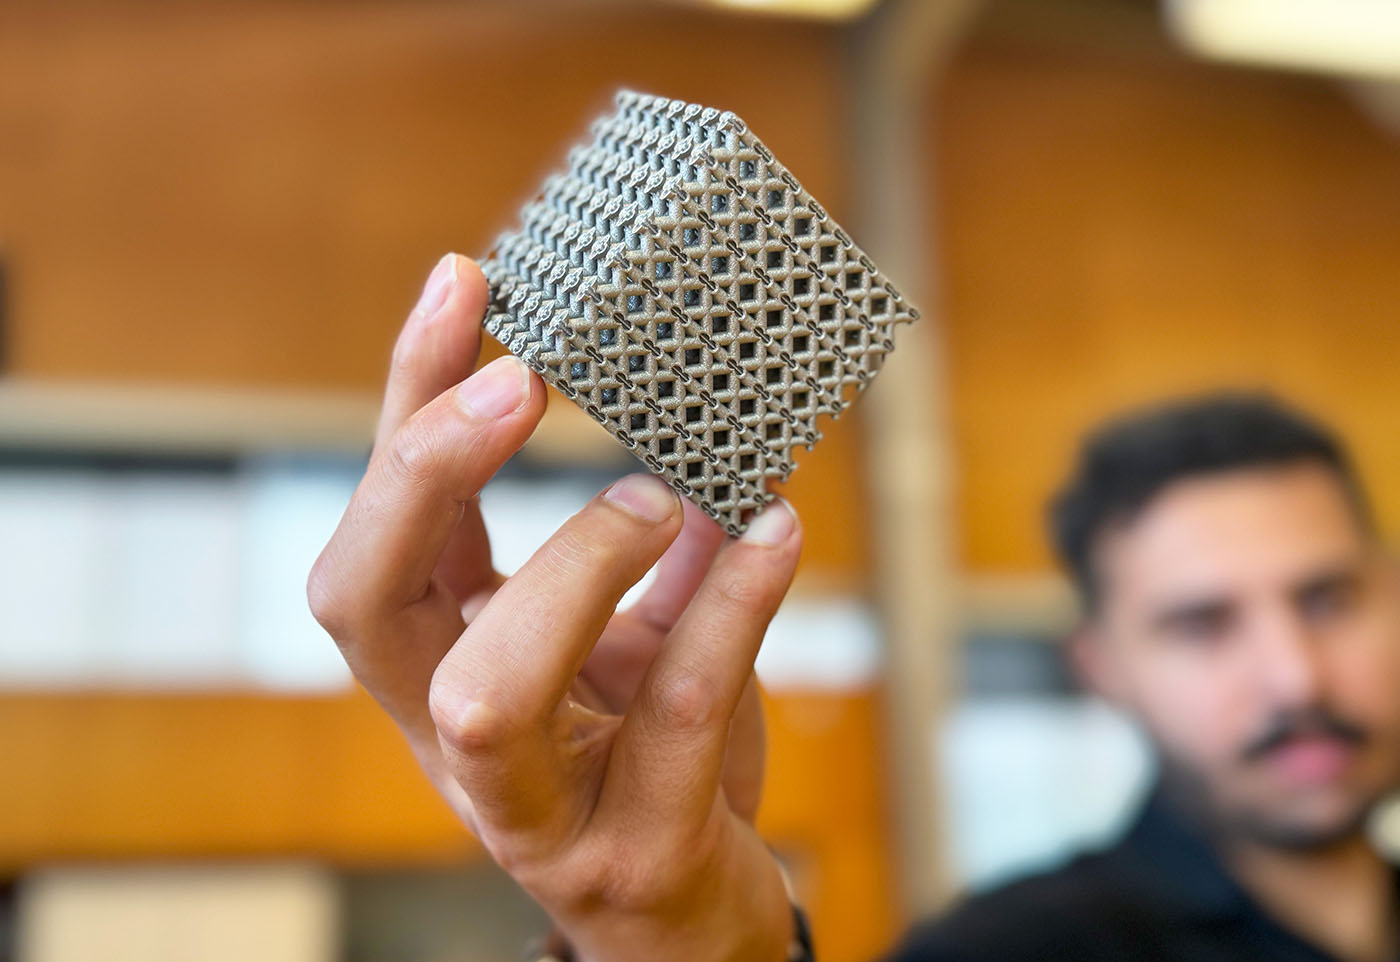 PhD candidate Jordan Noronha holding a sample of the new titanium lattice structure 3D printed in cube form. Credit: RMIT.